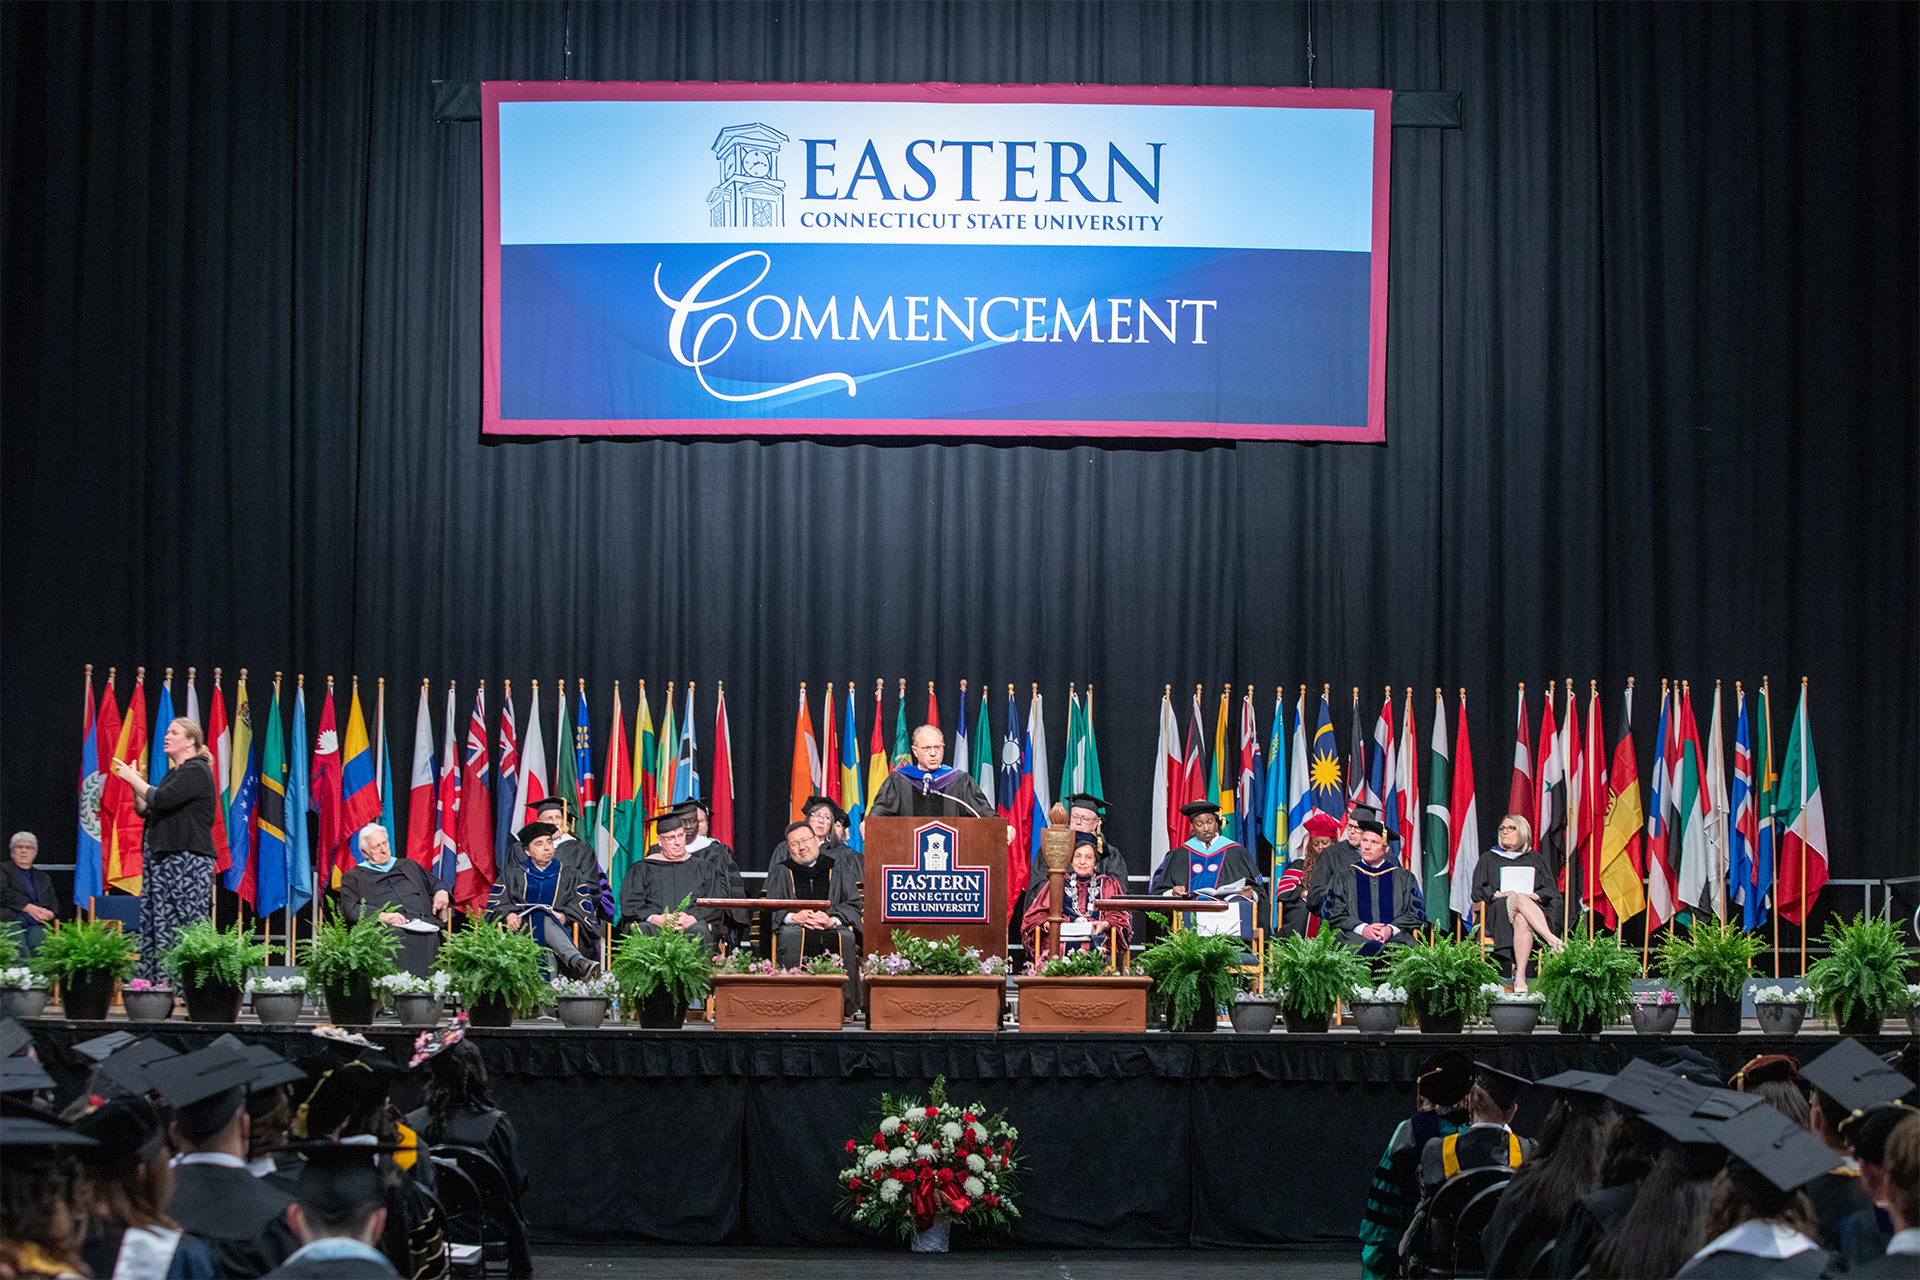 view of the Commencement stage, with flags behind the speaker